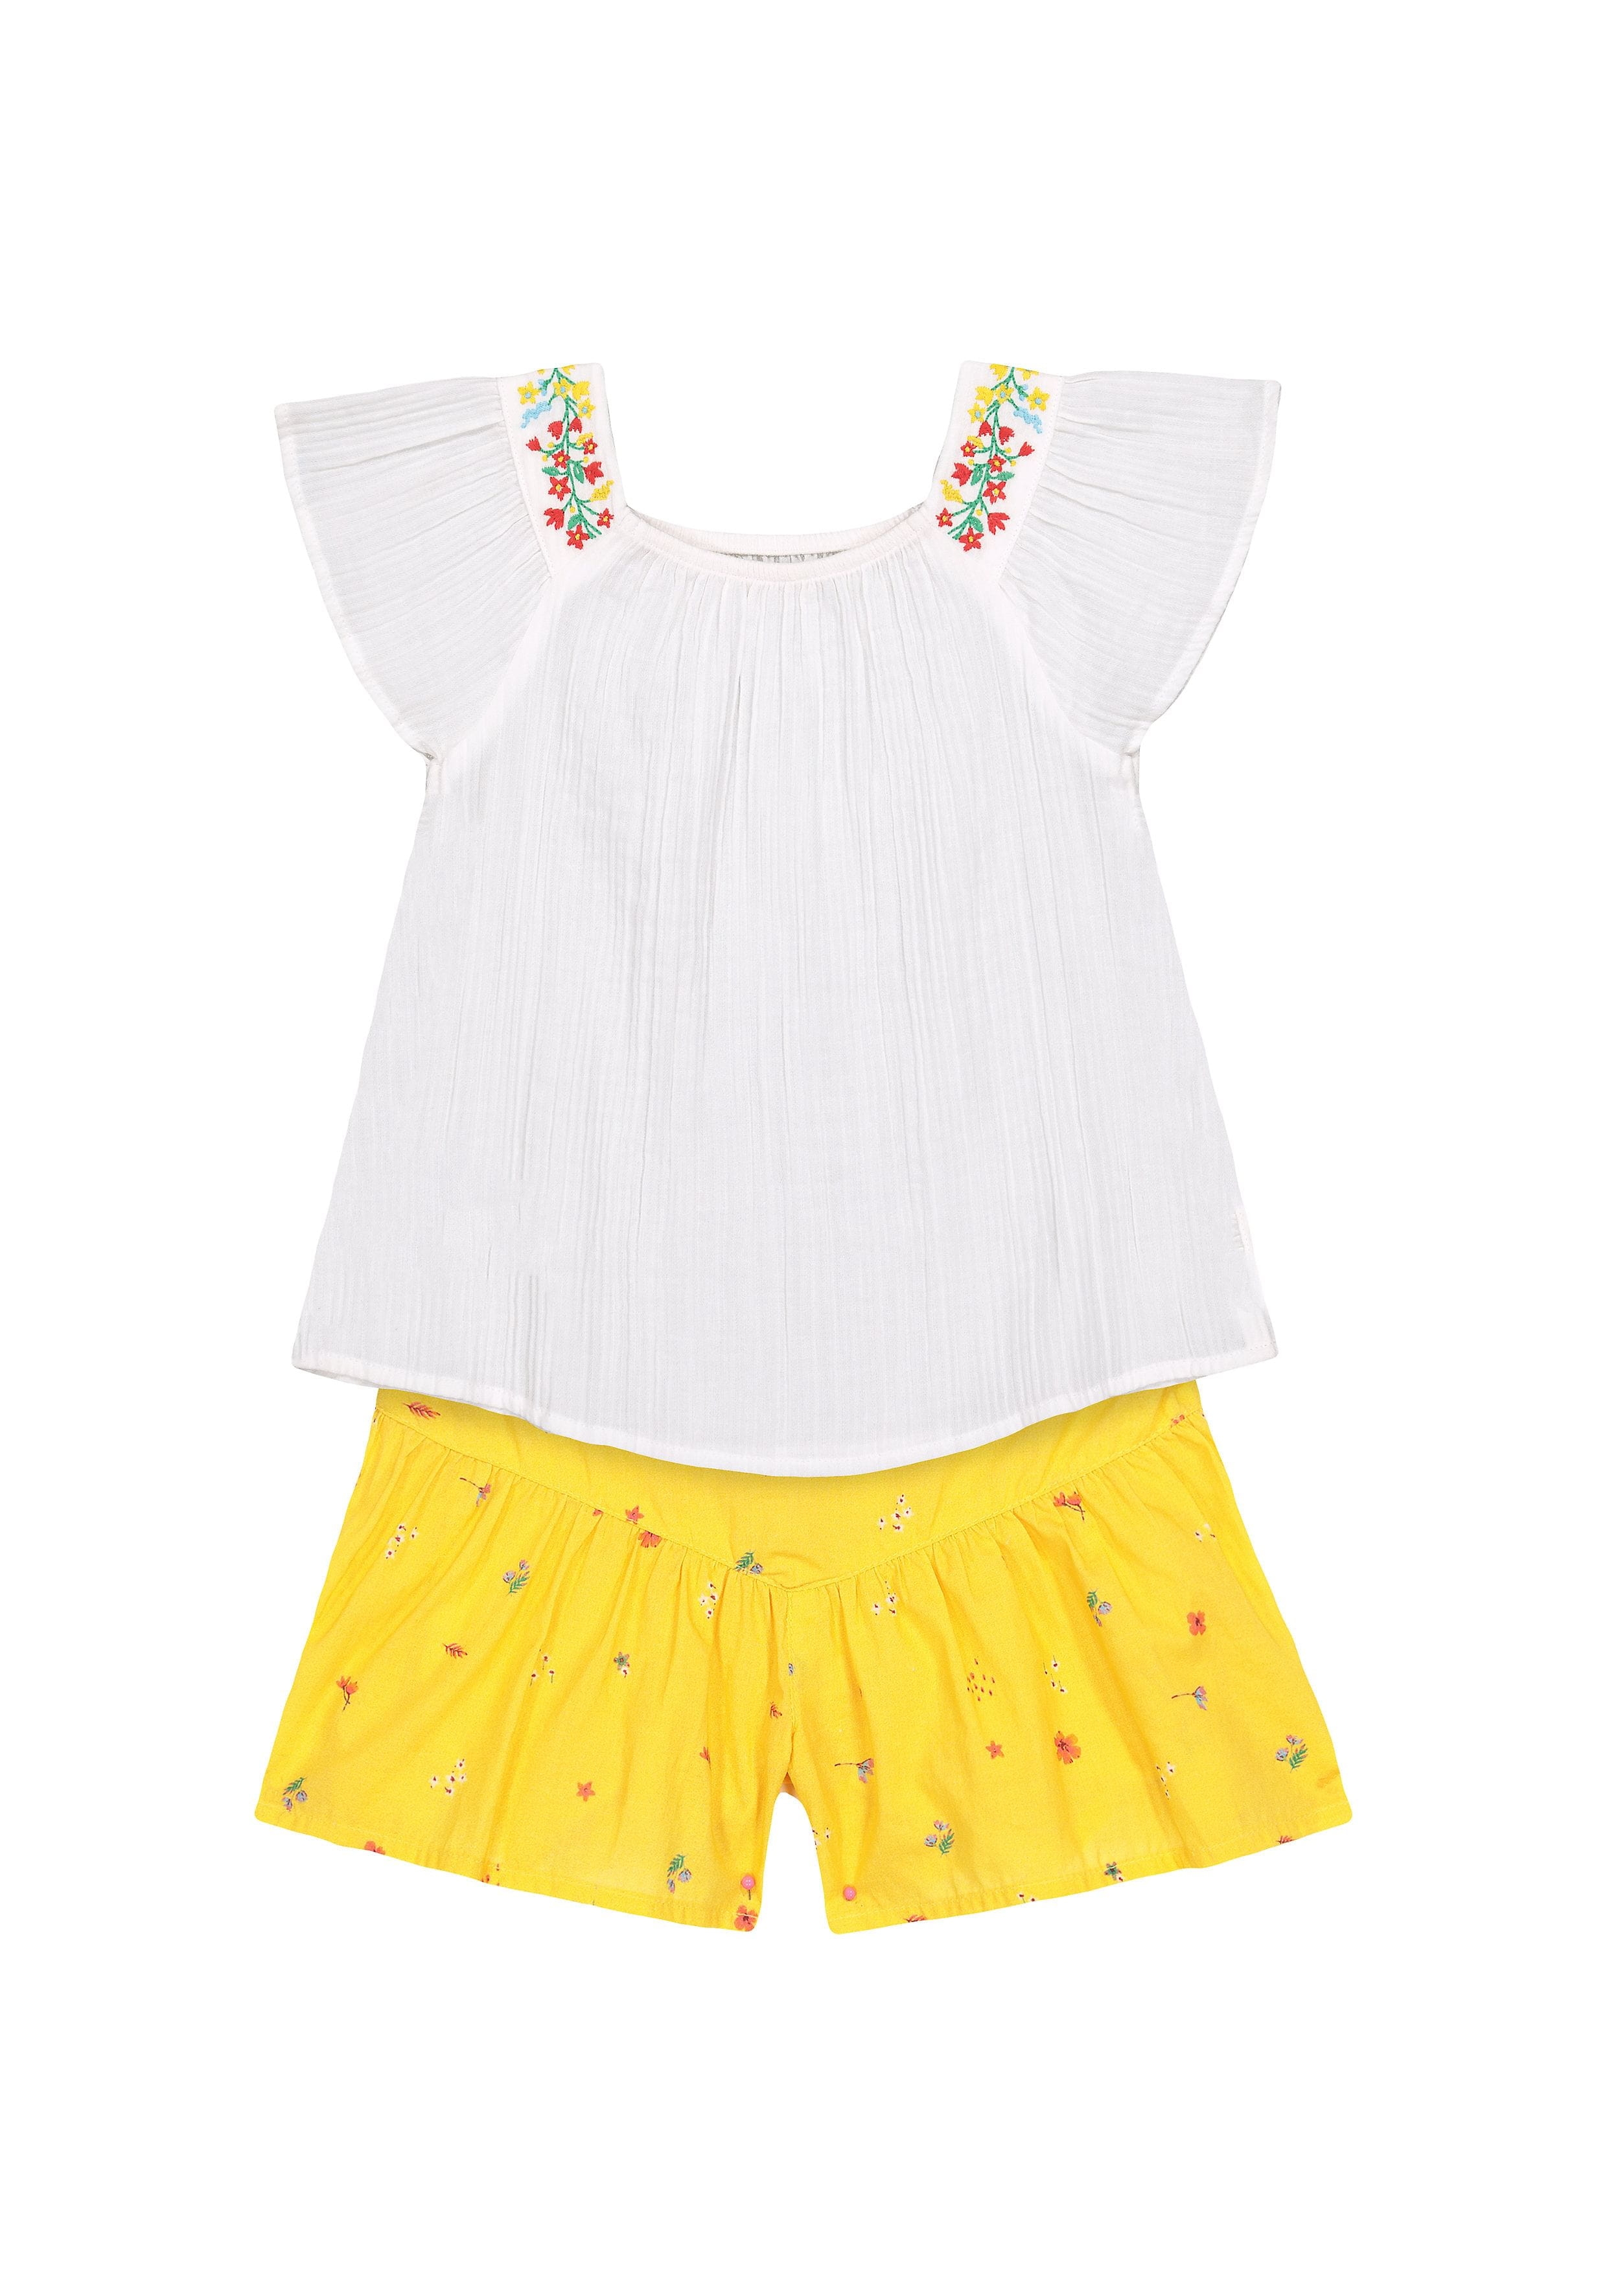 Mothercare | Girls Half Sleeves Embroidered Tops And Shorts Set - White Yellow 0